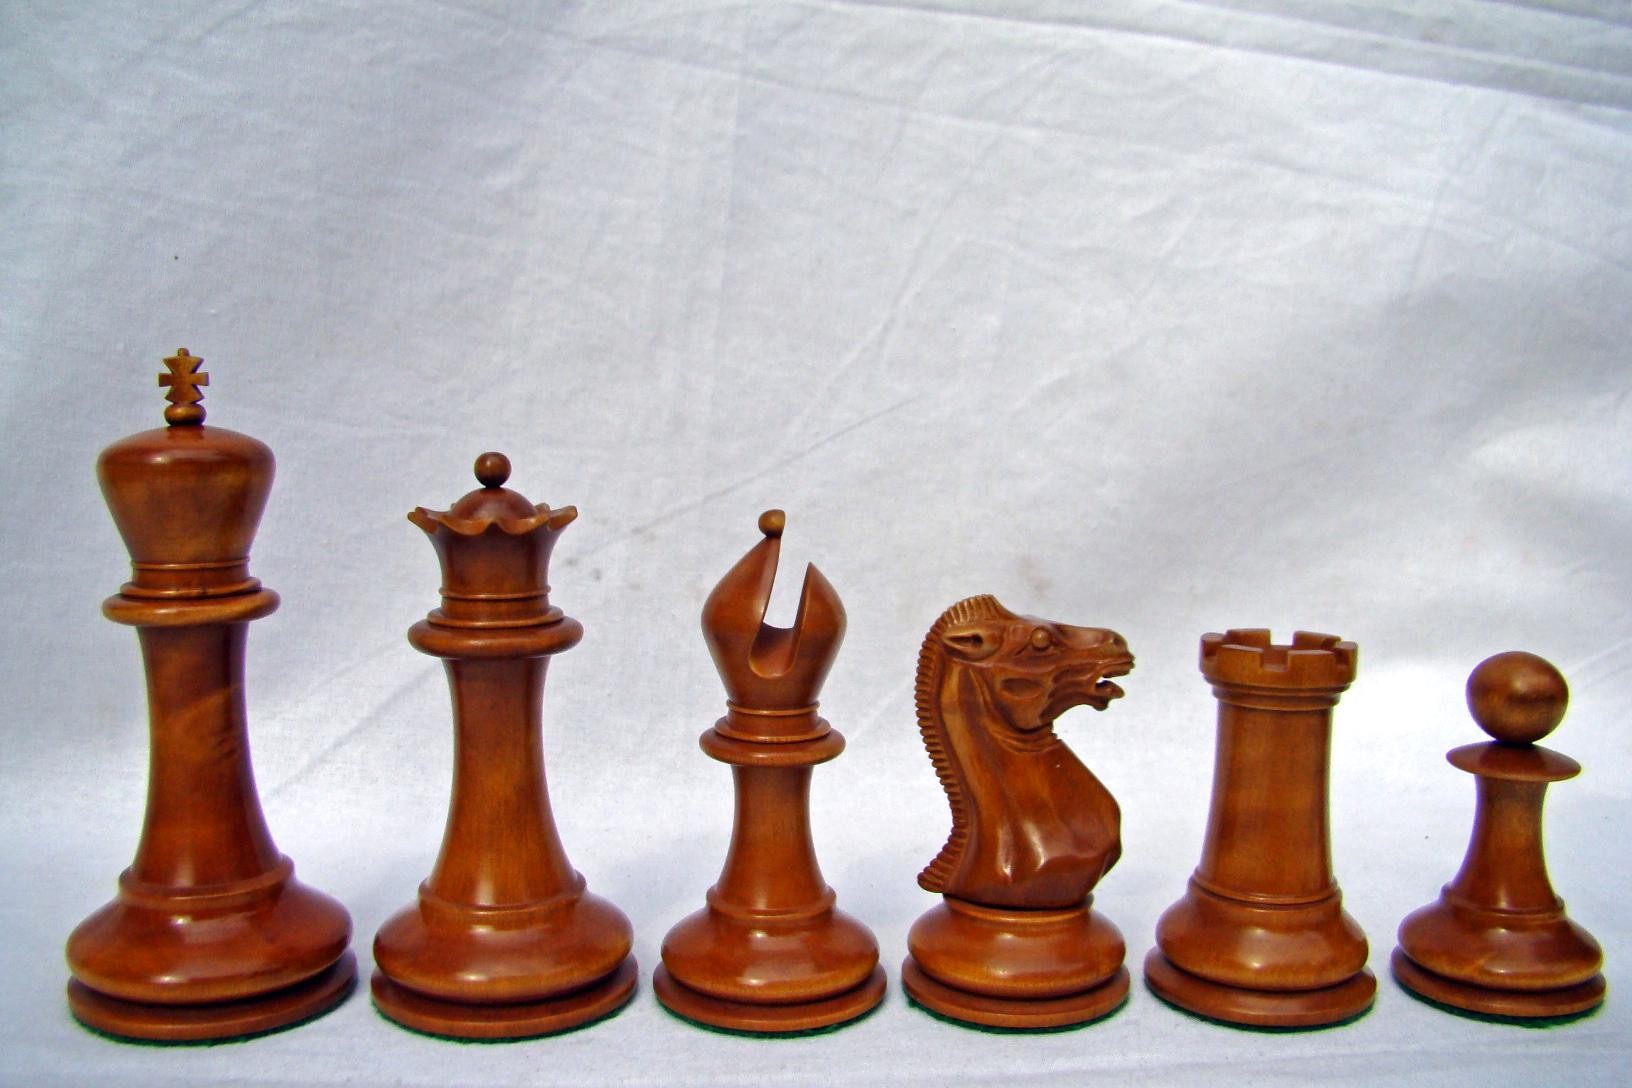 Official Staunton's Amazing 1849 Antique Lacquered and Ebony Chess Set.